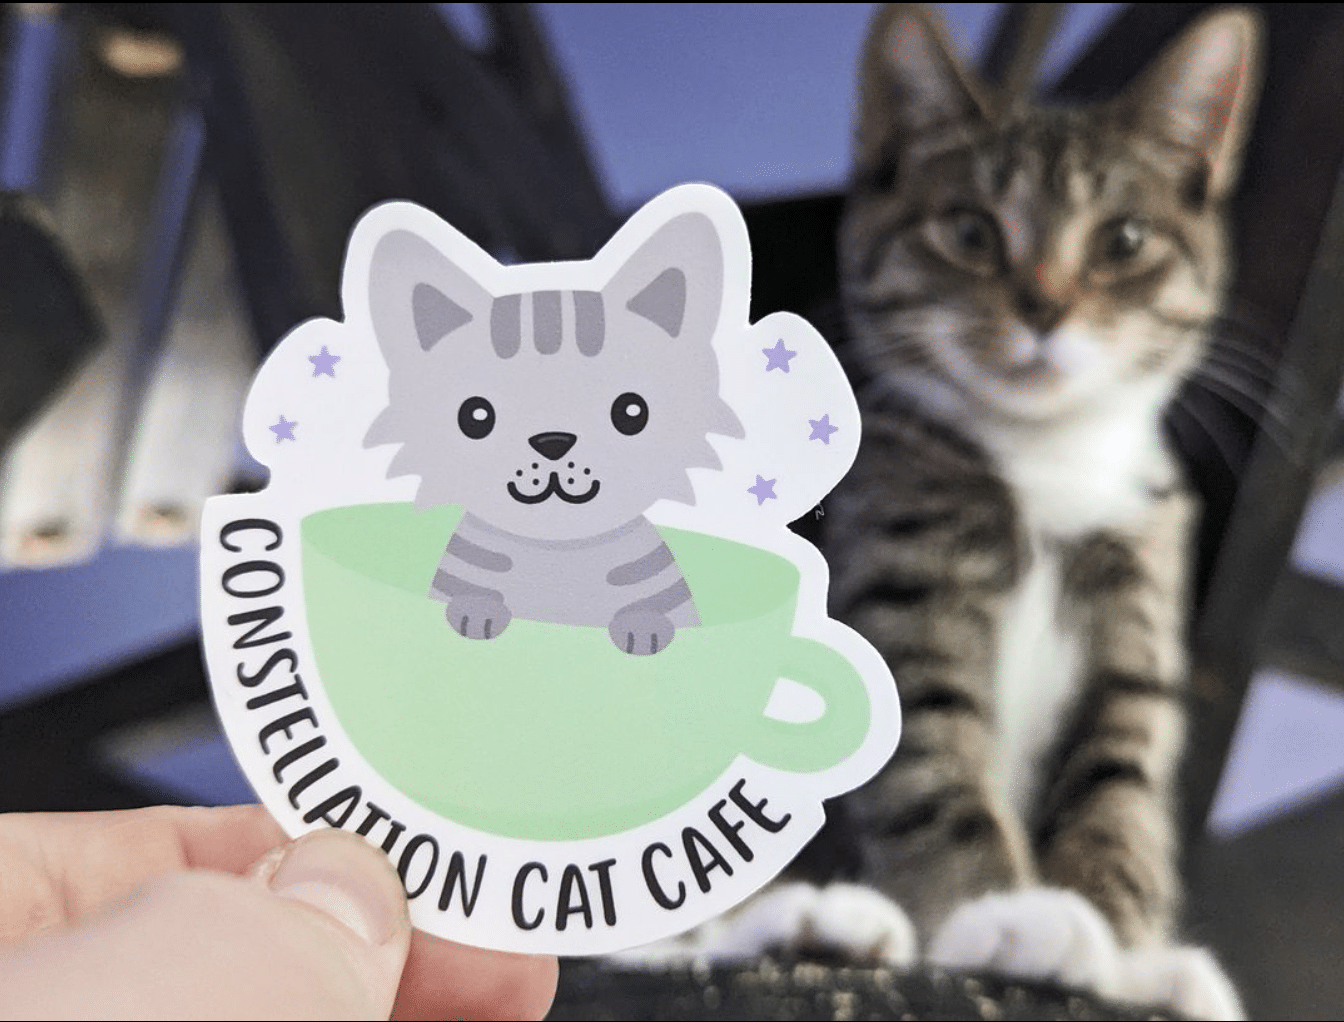 Constellation Cat Cafe, a purrfect destination in the Lansing Region